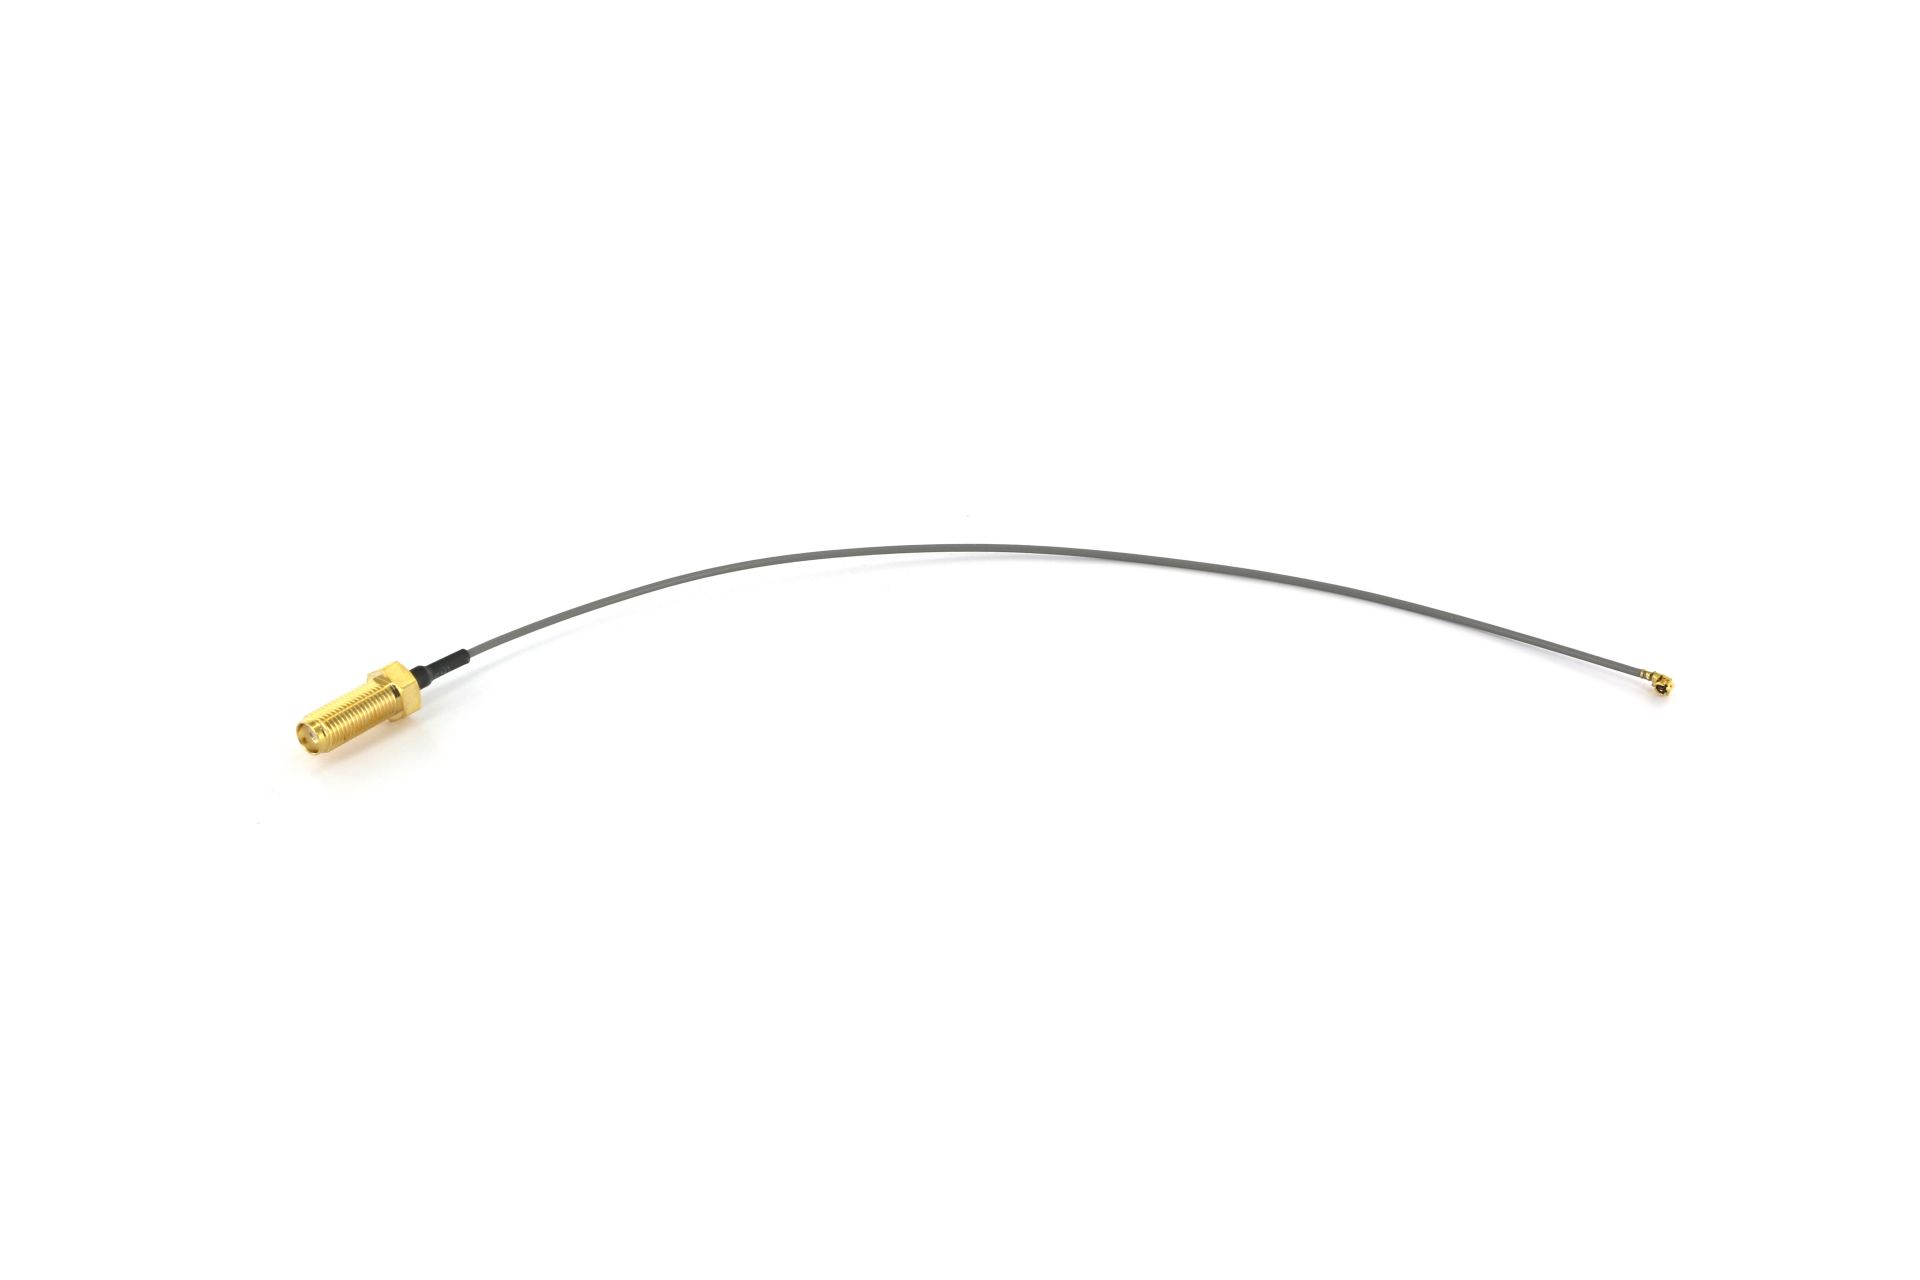 SMA JACK TO IPEX CABLE-01